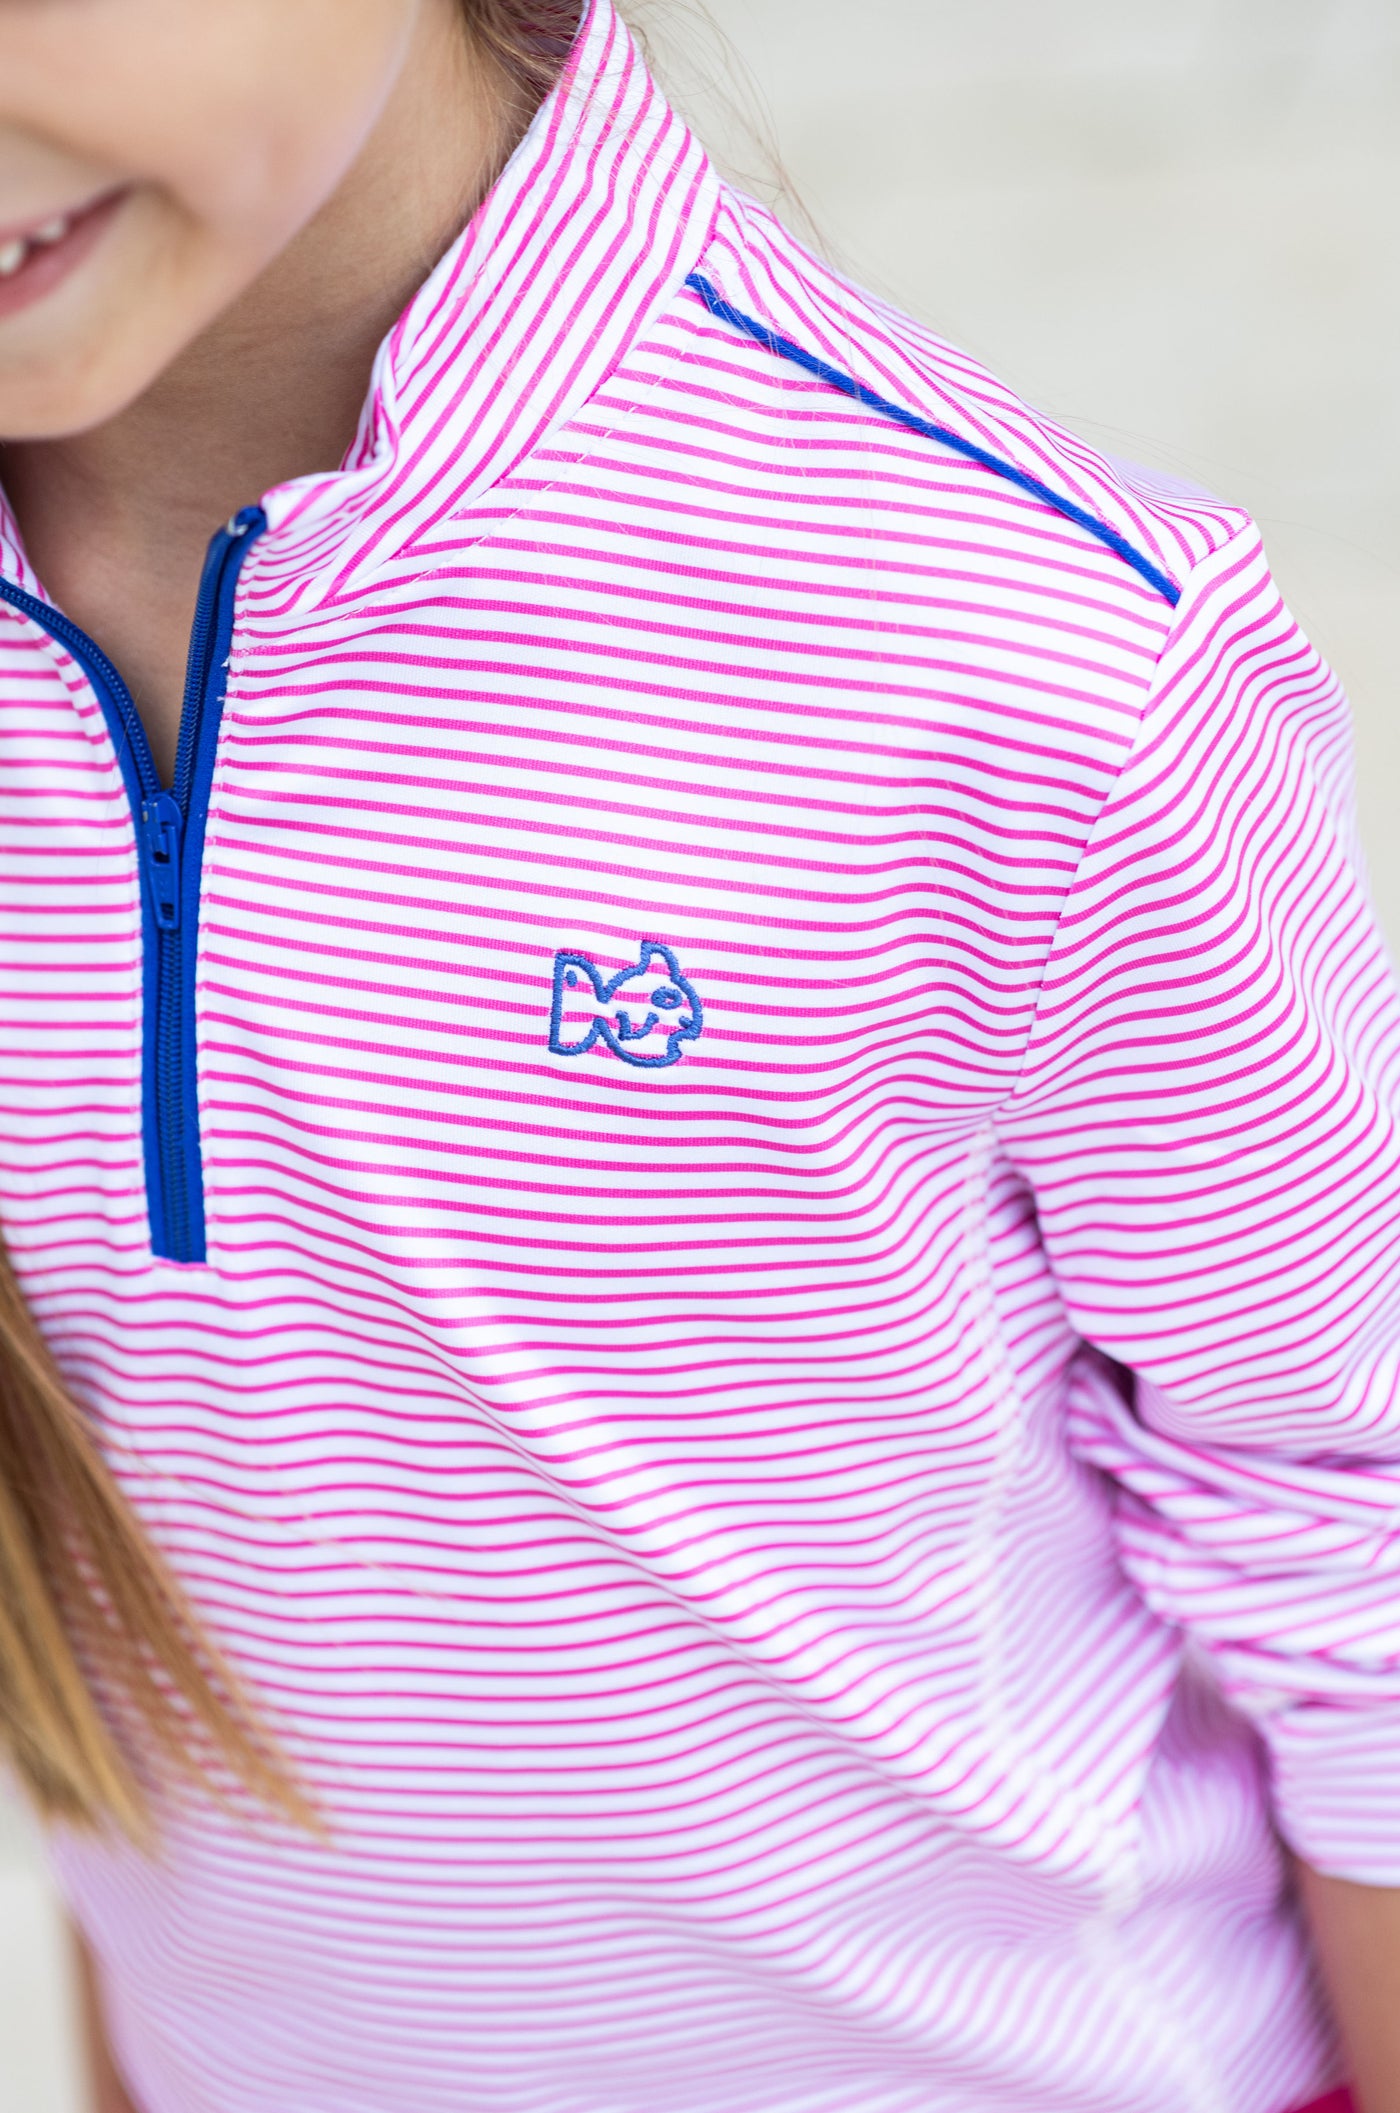 Pro Performance 1/4 Zip Pullover in Cheeky Pink Stripe